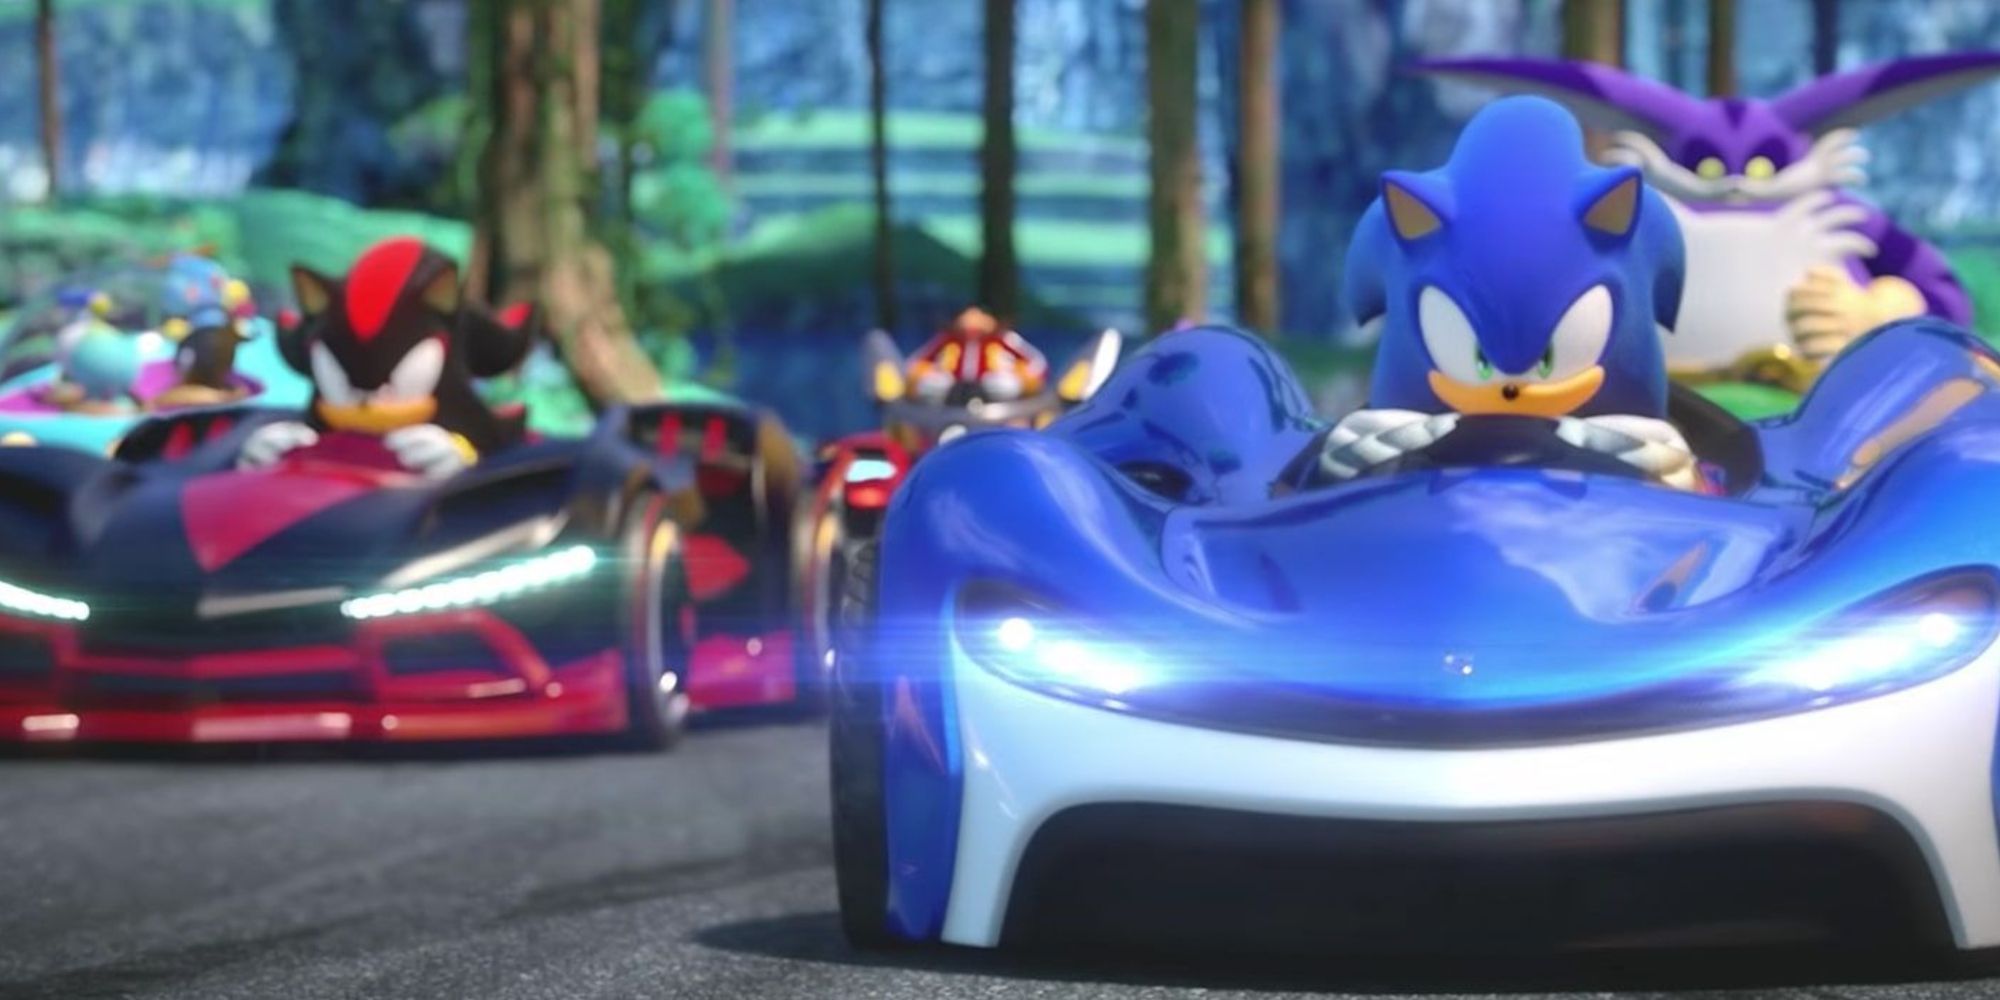 Sonice races down the road with Shadow and Big the Cat behind him